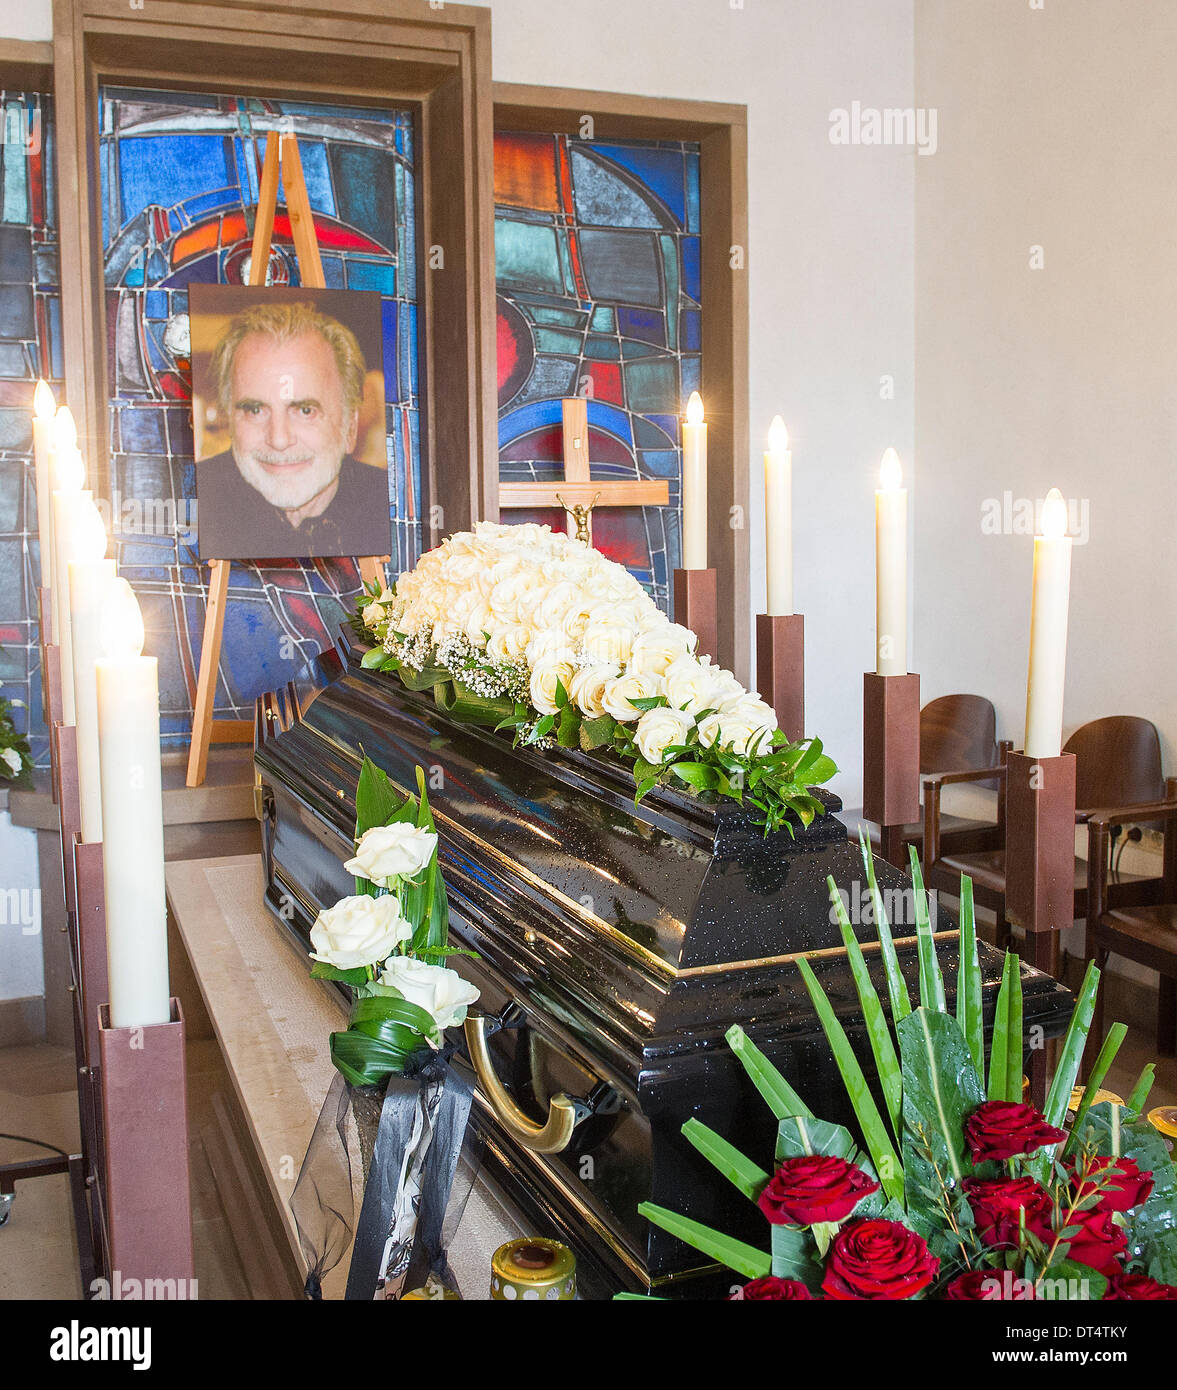 Preitenegg, Austria. 08th Feb, 2014. A view of the coffin of Swiss-Austrian actor Maximilian Schell during his funeral in his hometown Preitenegg, Austria, 08 February 2014. Maximilian Schell died aged 83 after a surgery on 01 February 2014. Photo: Marc Mueller/dpa/Alamy Live News Stock Photo